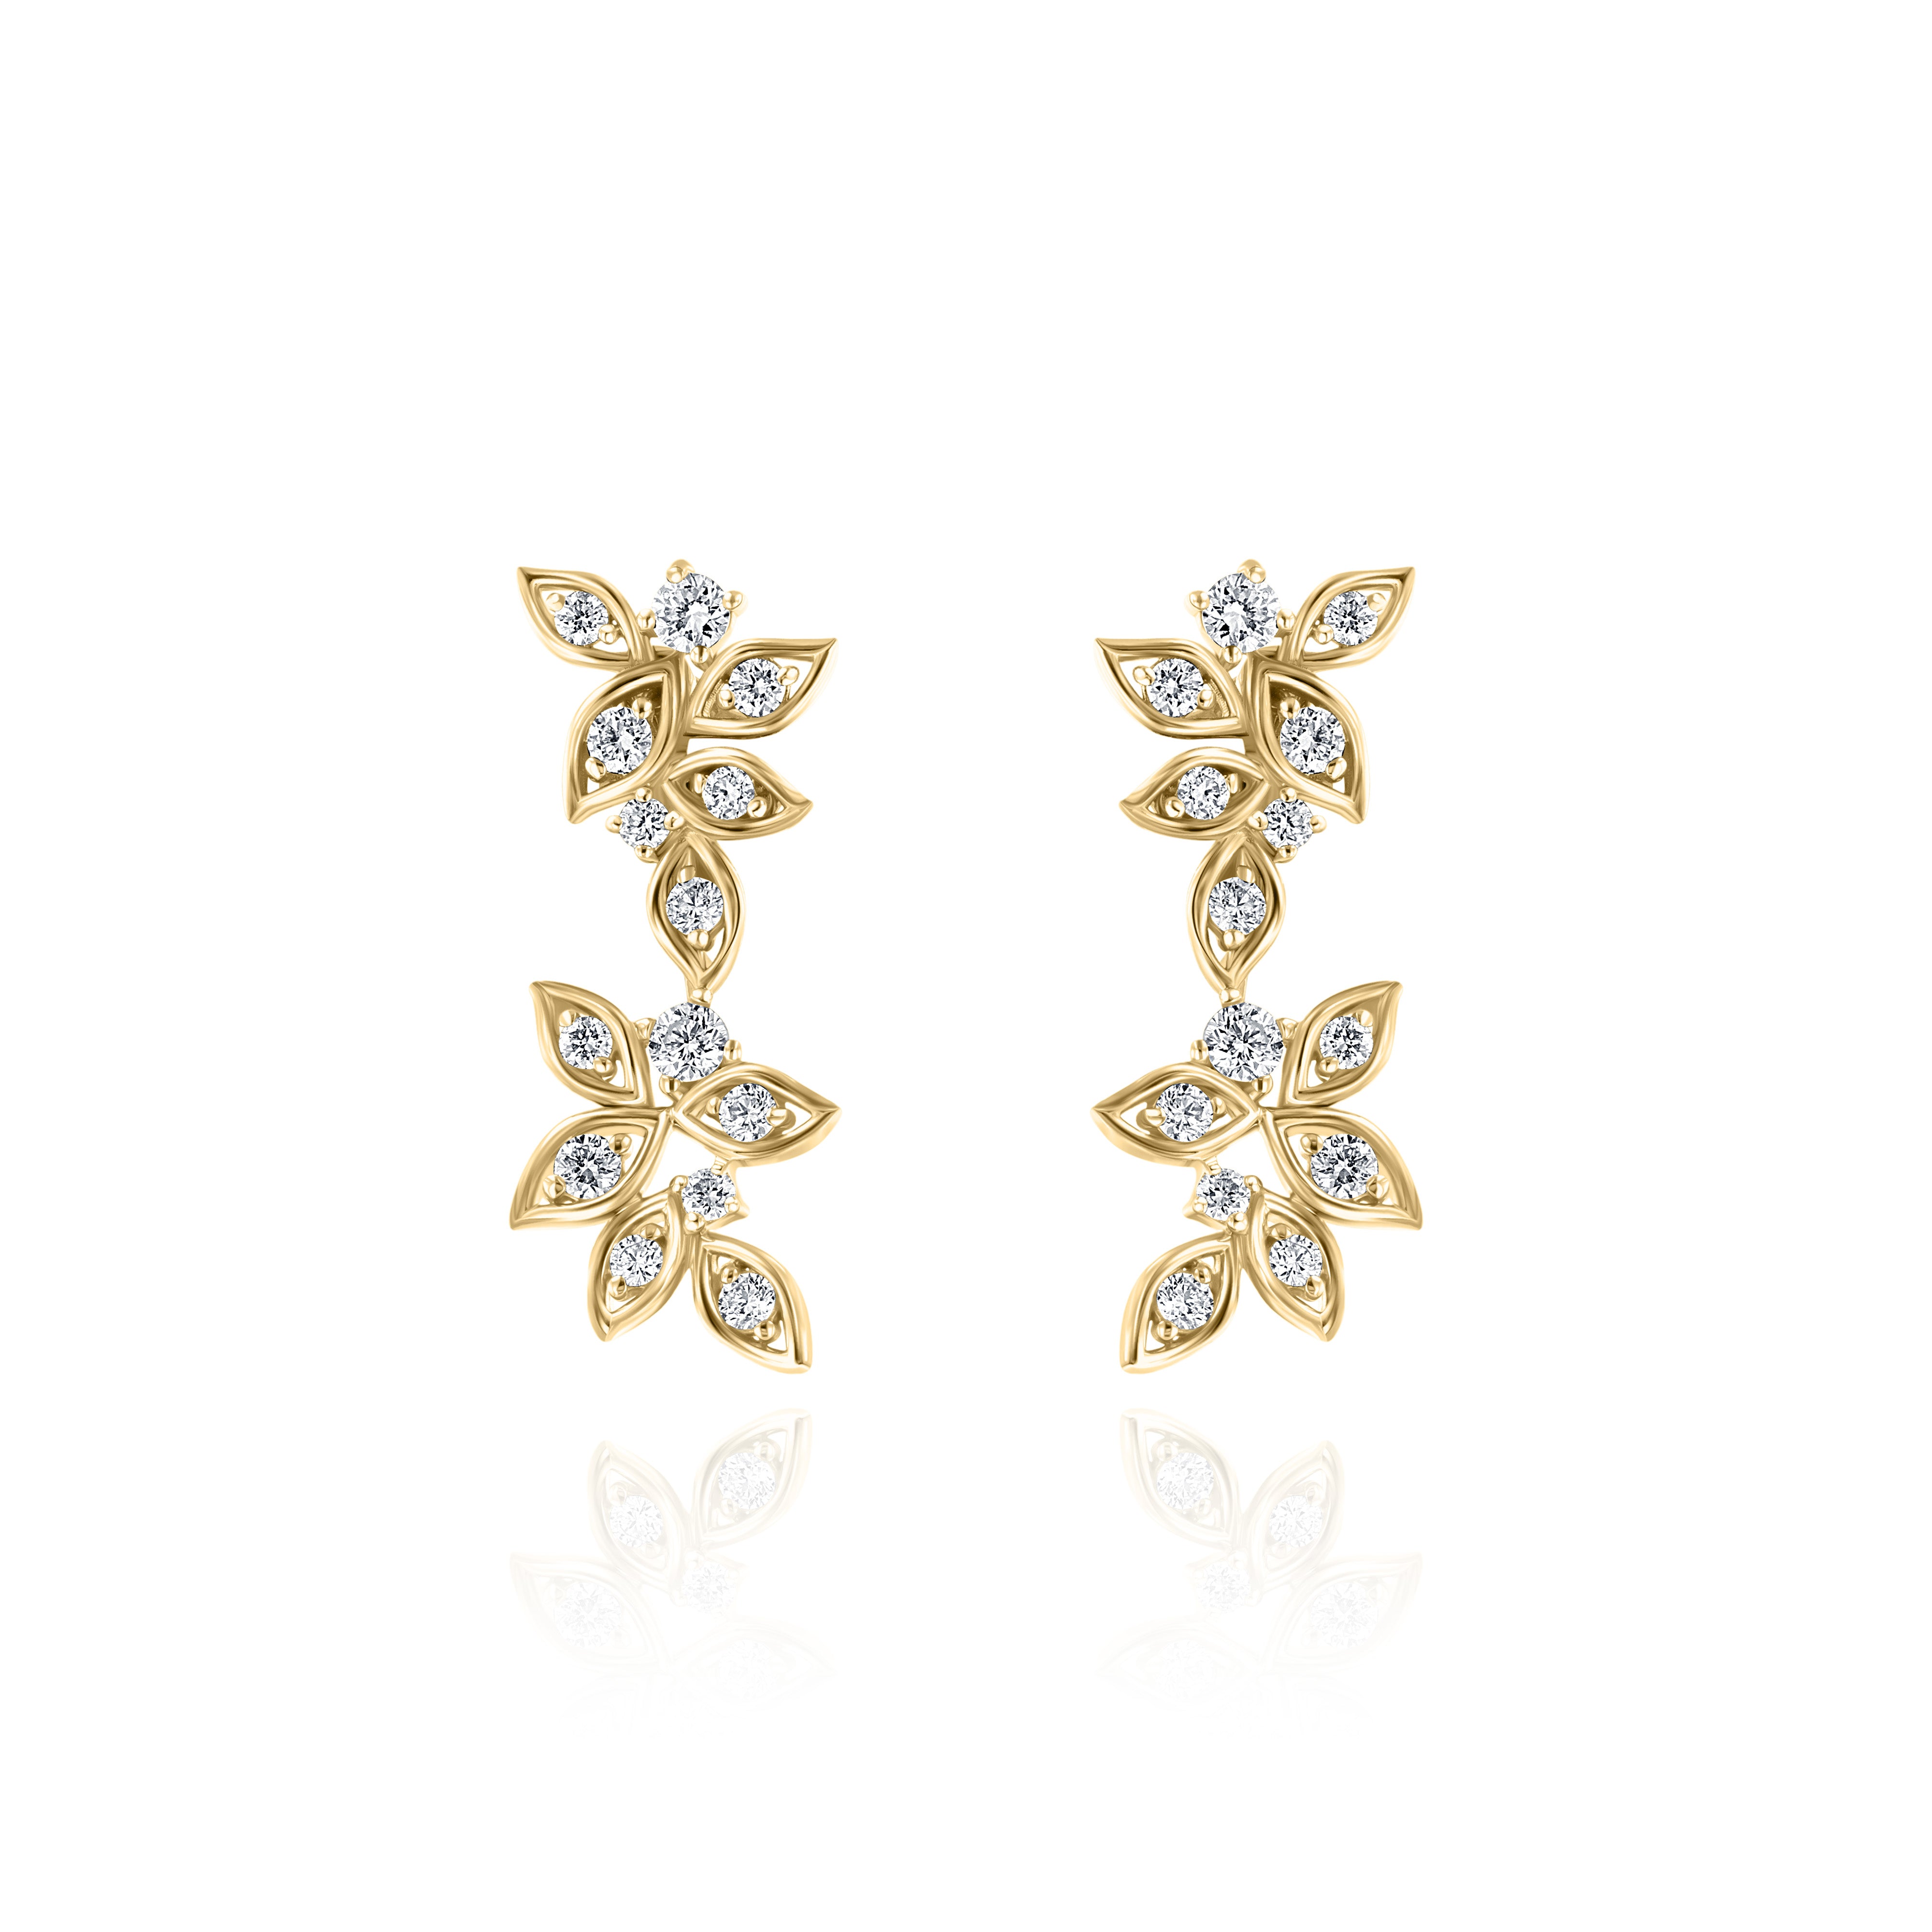 Earrings with Yellow Gold petals and round Diamonds inside them, Small